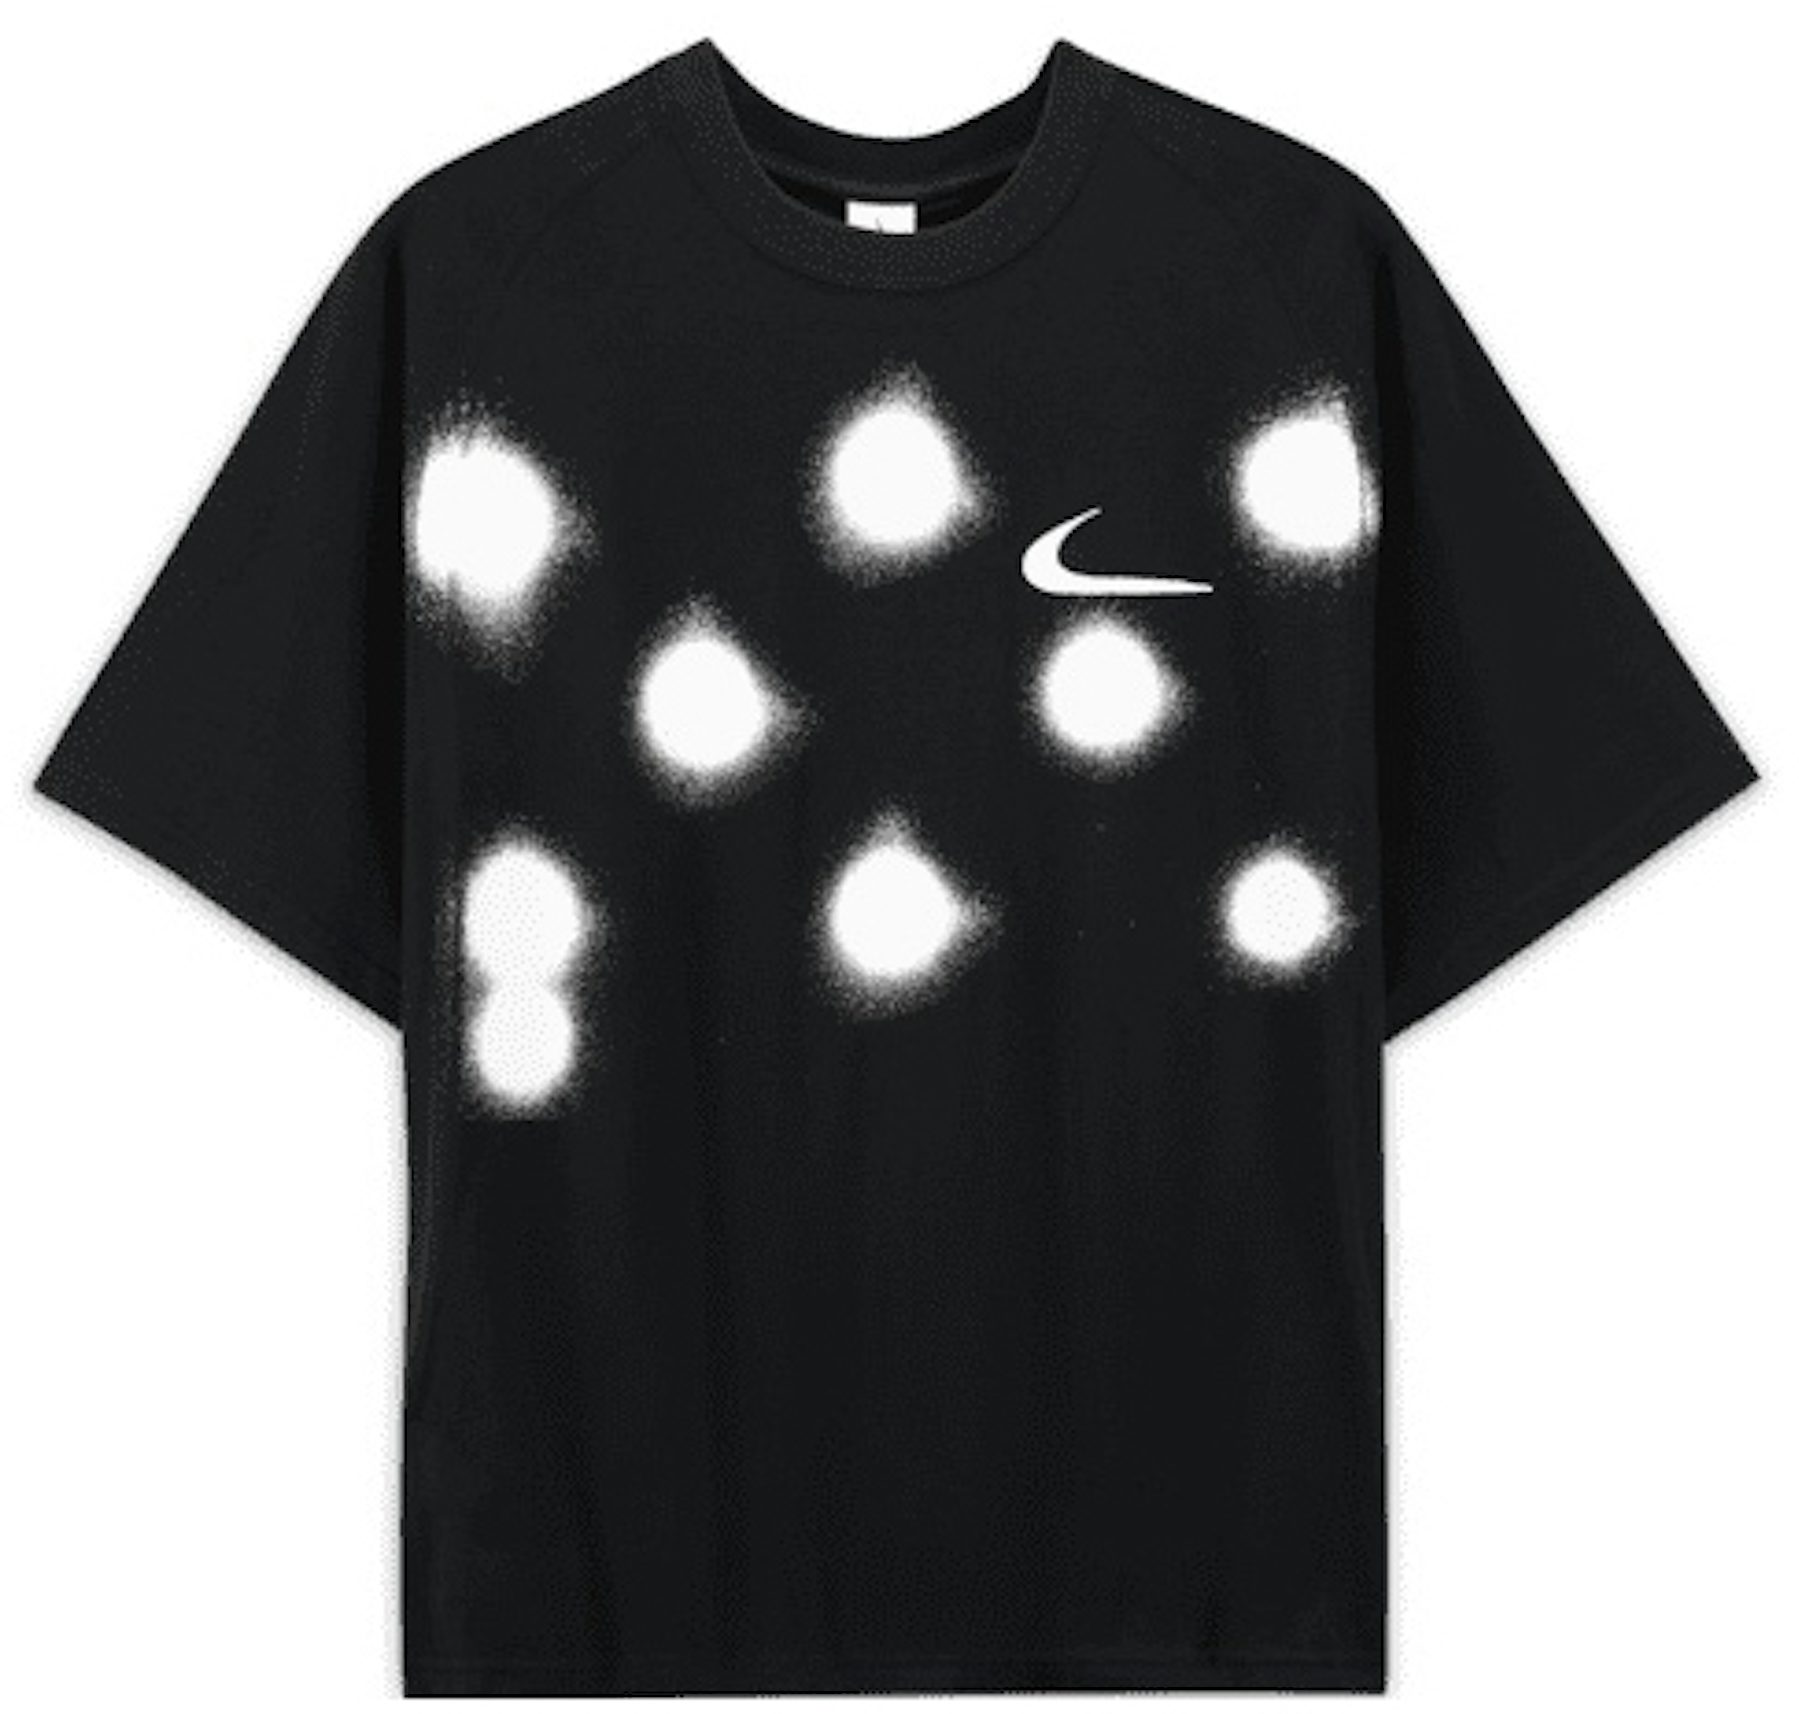 *NEW* OFF-WHITE VIRGIL ABLOH x NIKE UNRELEASED TRACK & FIELD T-SHIRT (SMALL)